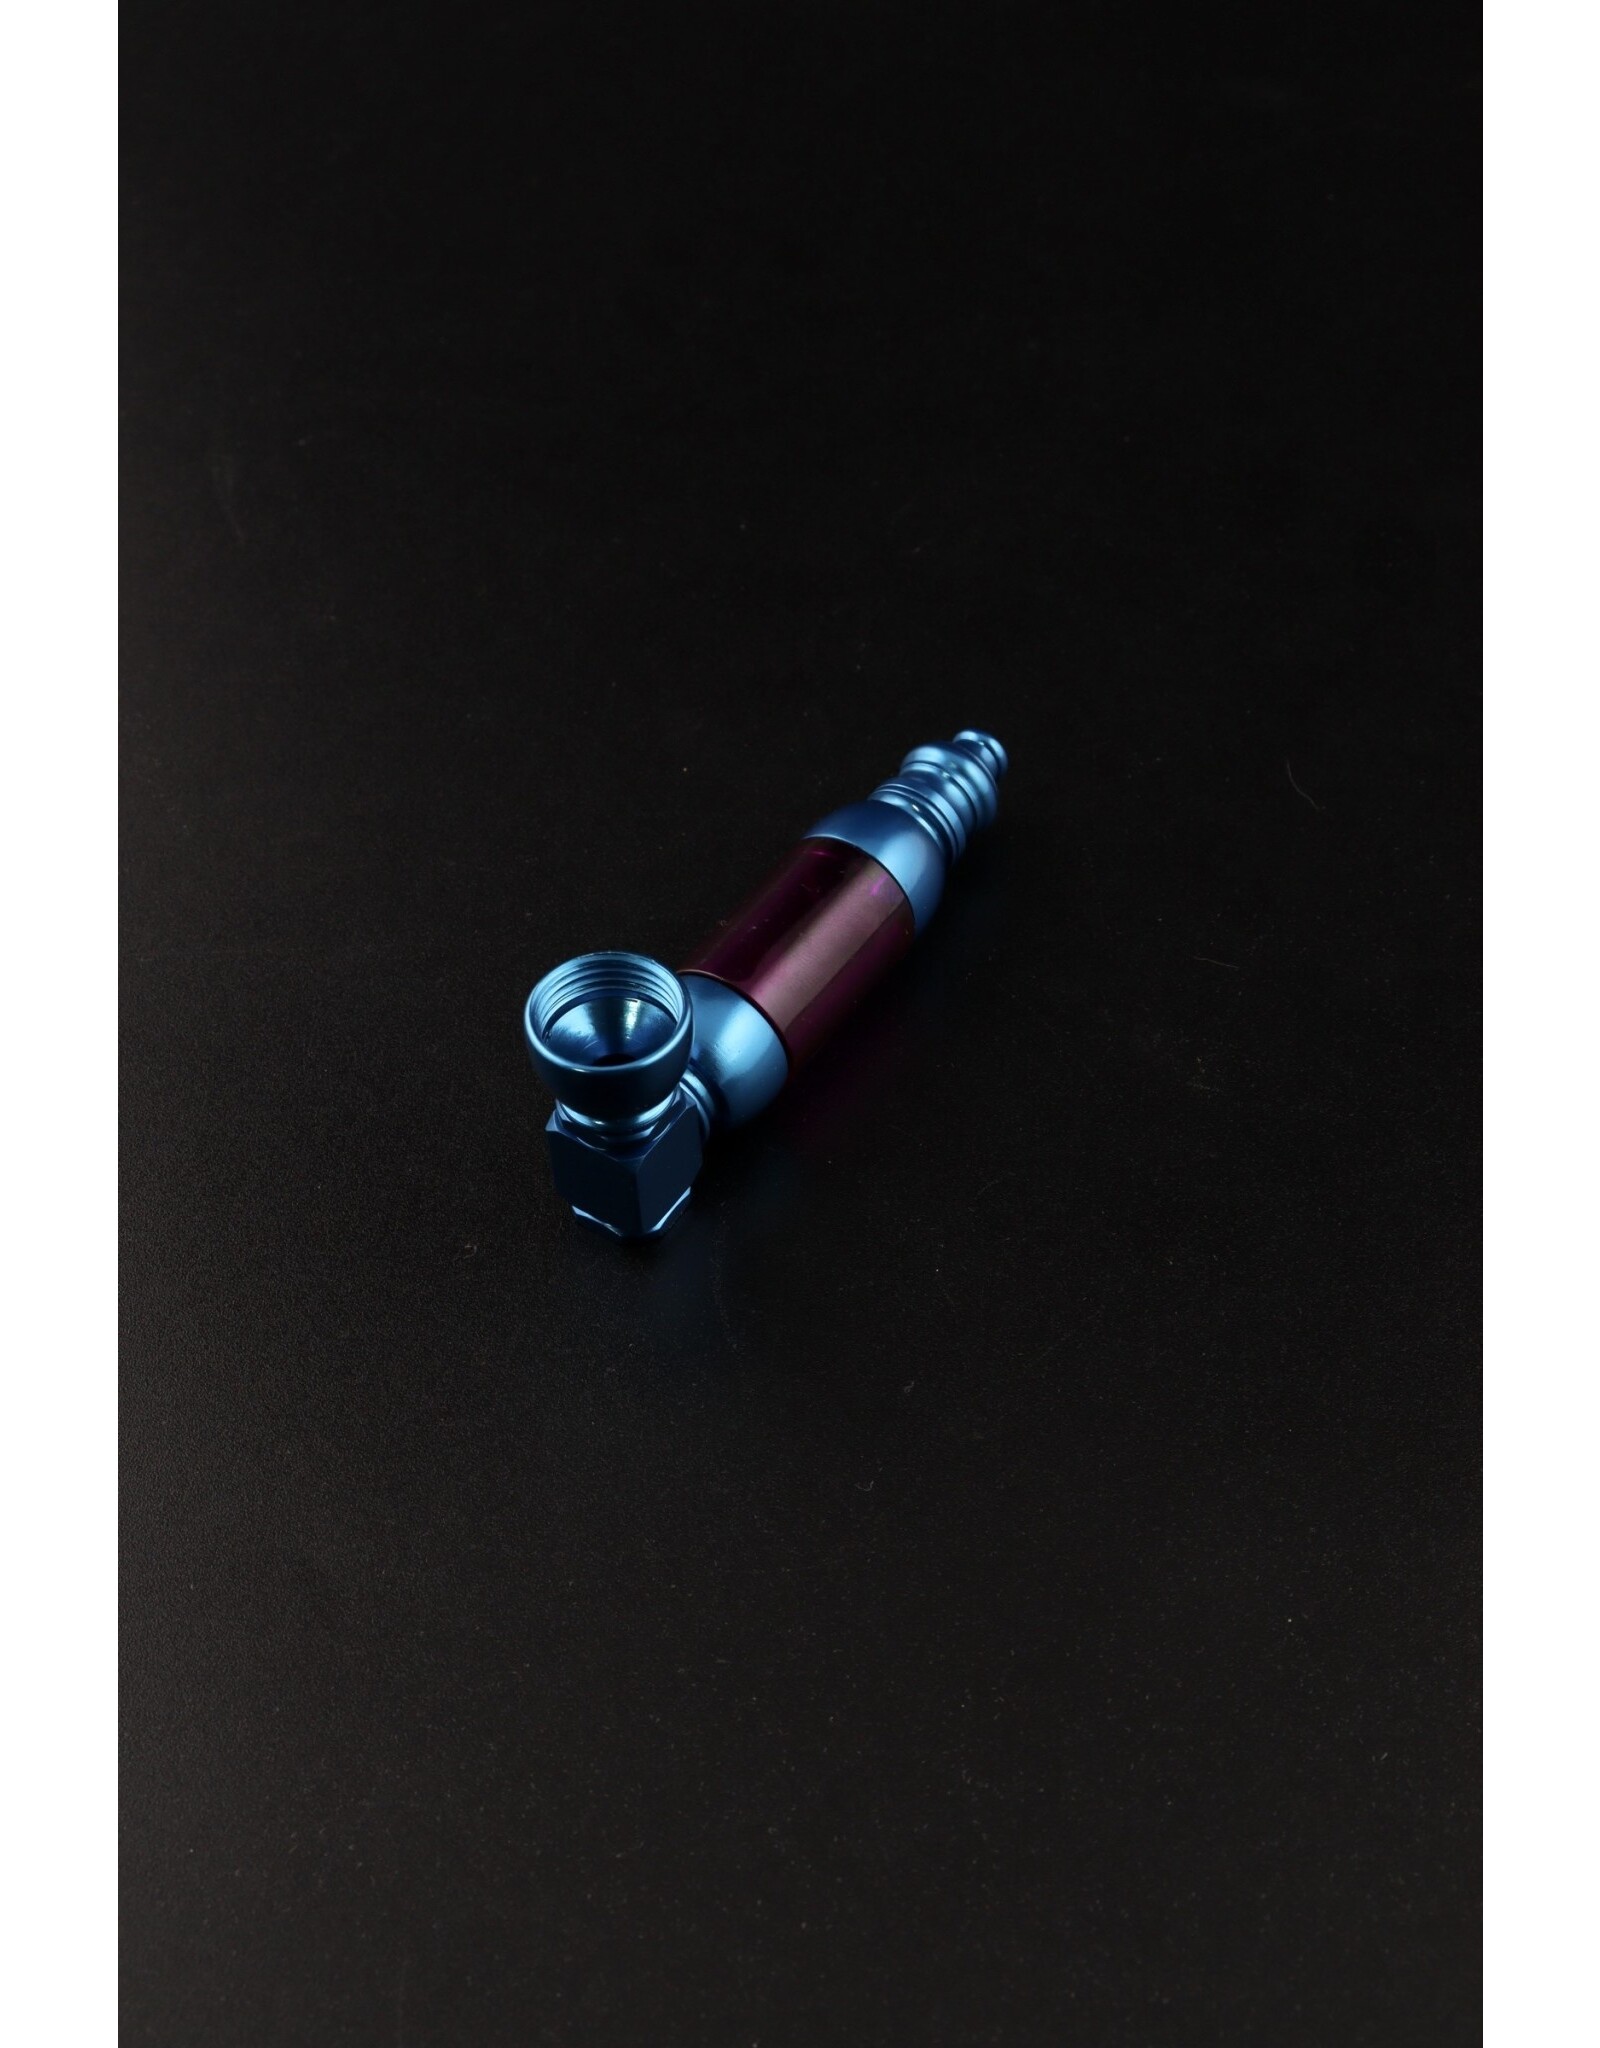 DAW Color Chamber in Anodized Aluminum Metal Hand Pipe